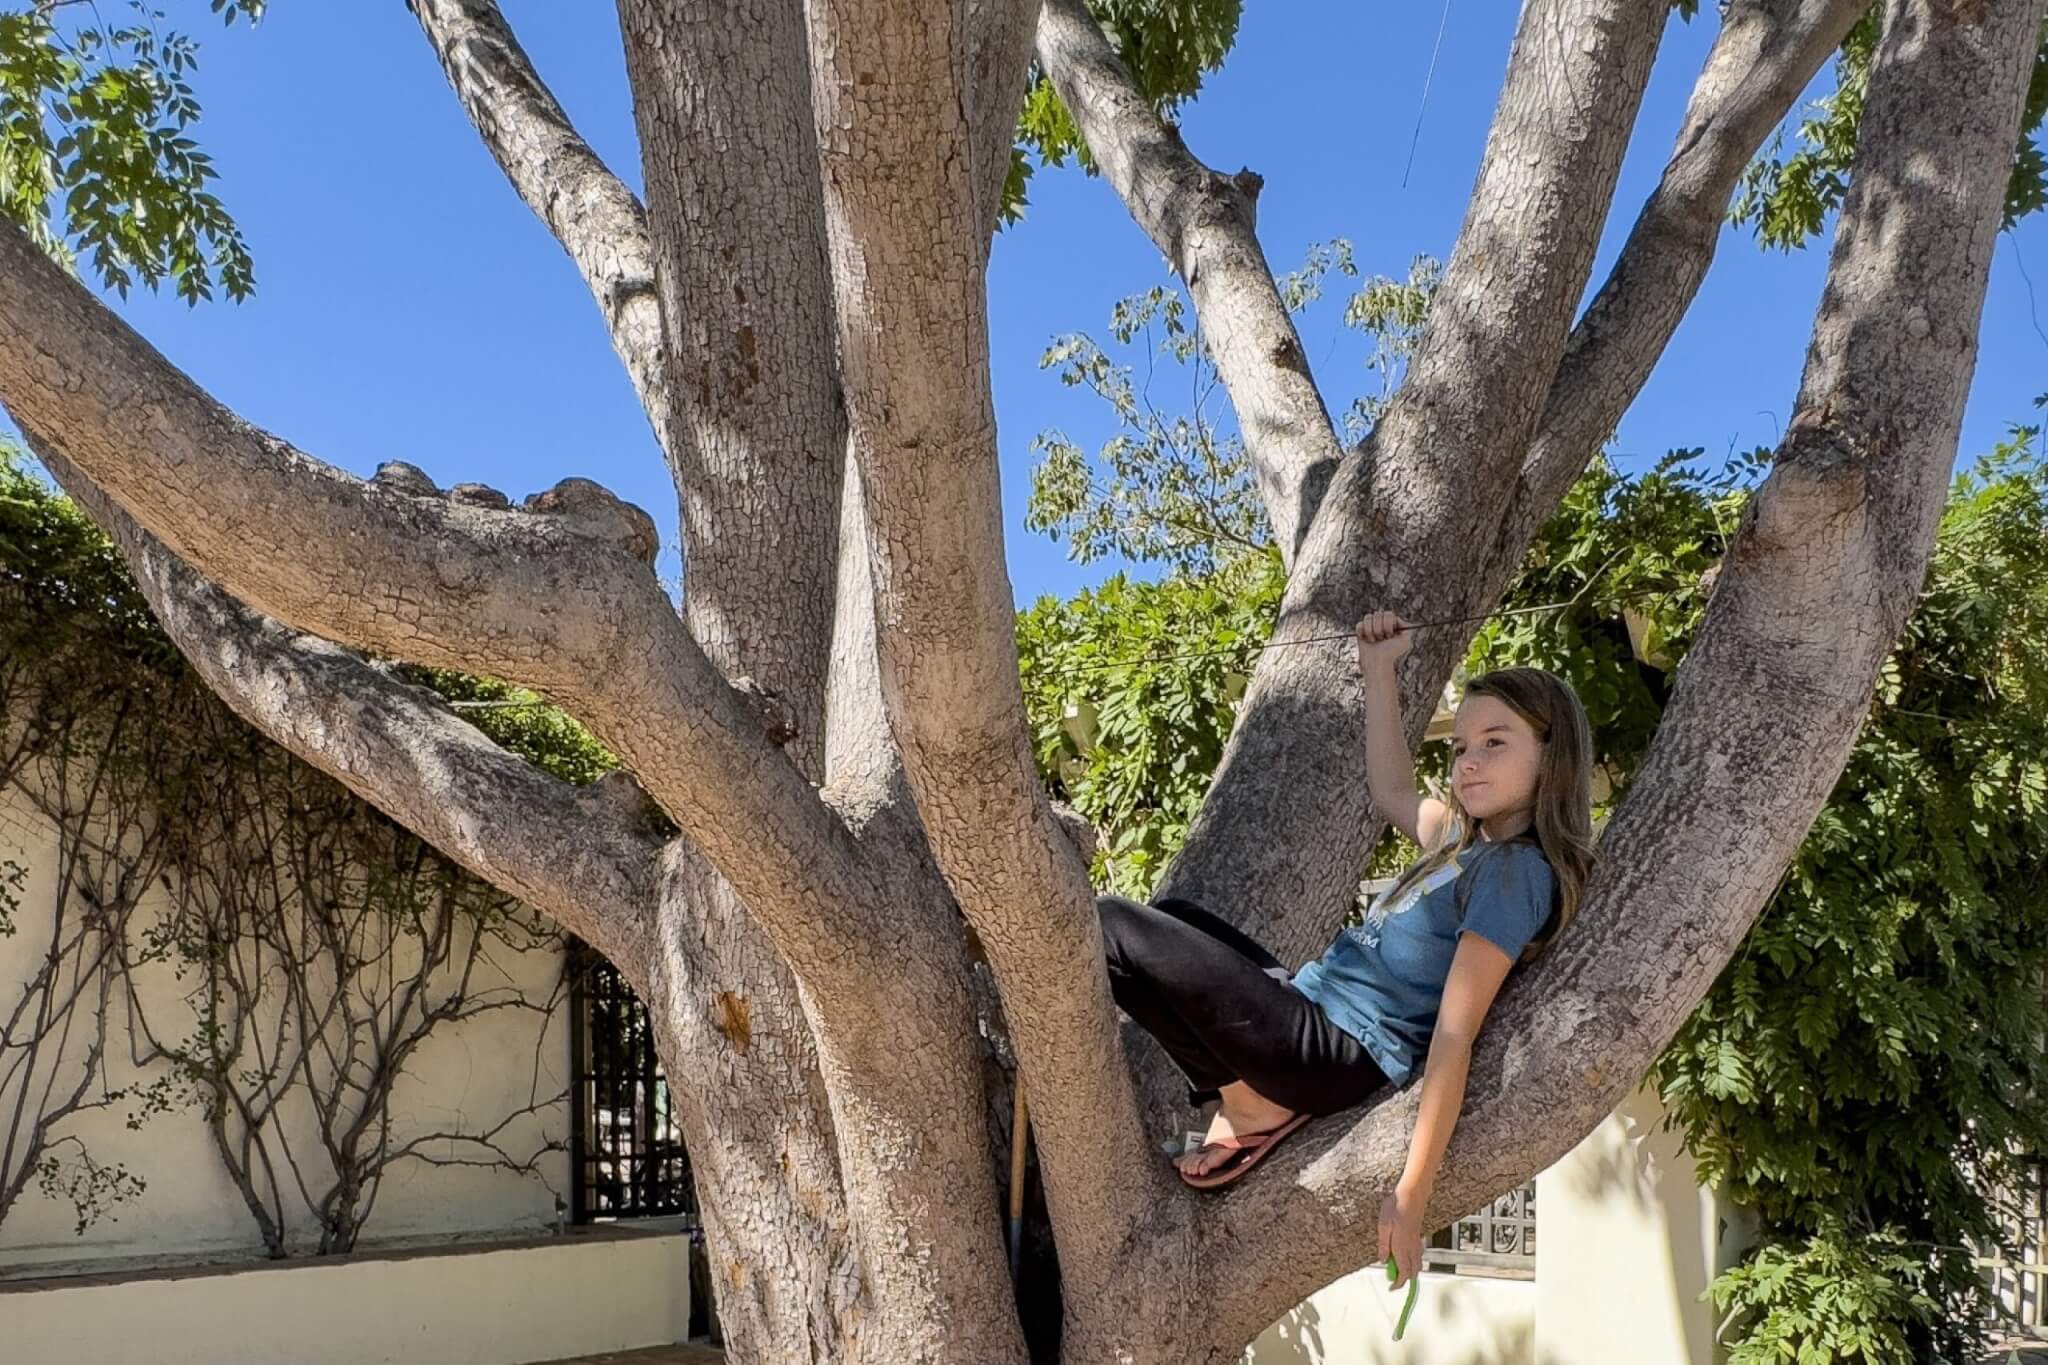 Child sits in UUSsm climbing tree contemplative; sunny day - photo